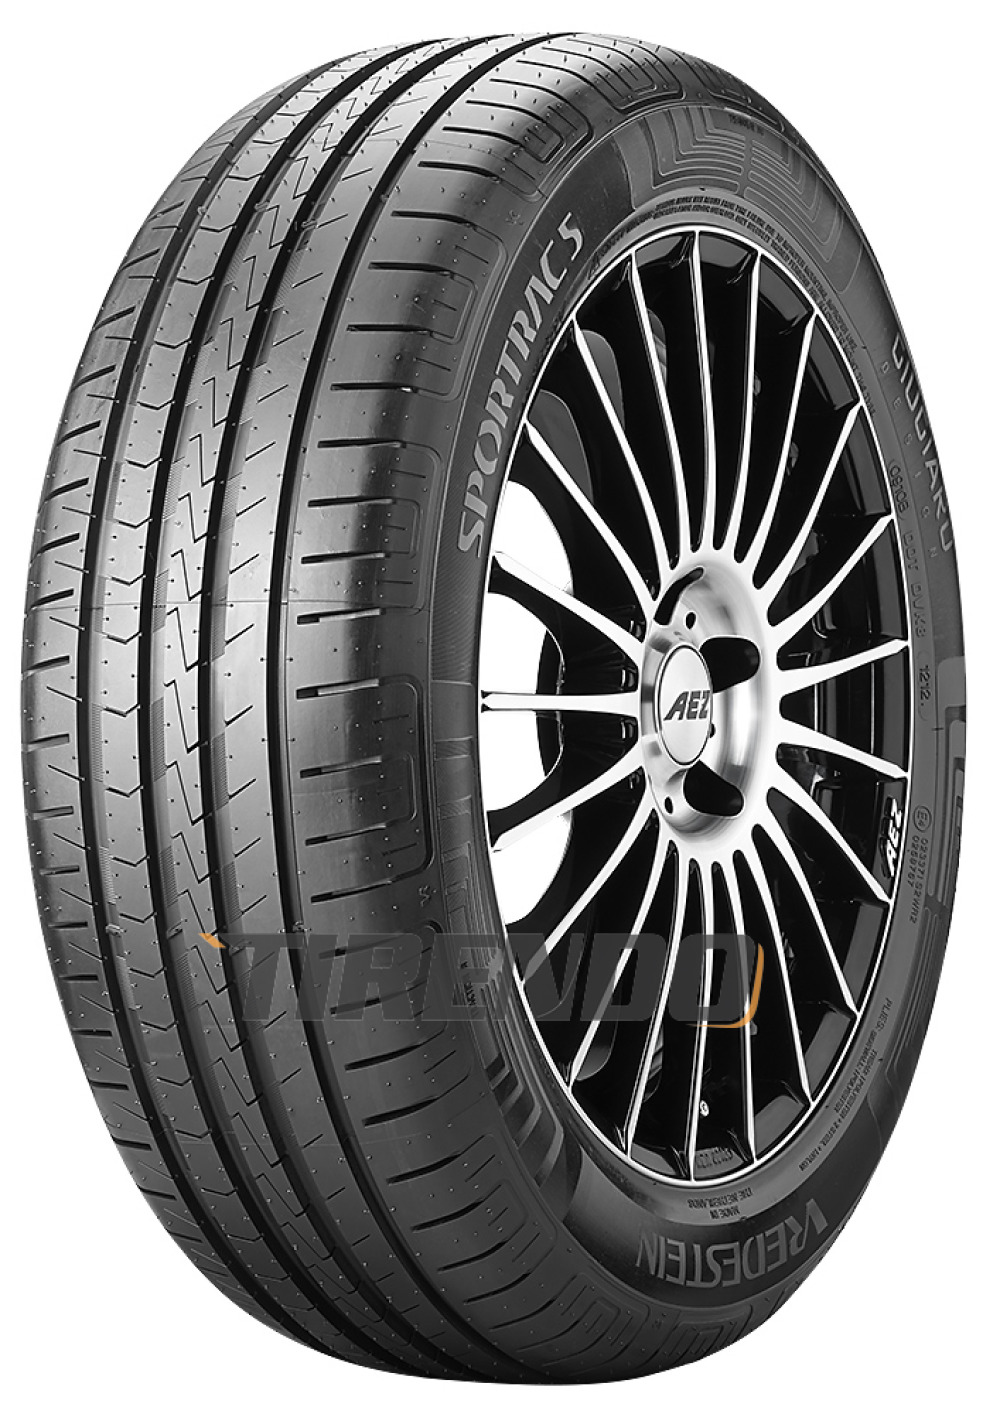 Sportrac - Tire and Tests Reviews Vredestein 5